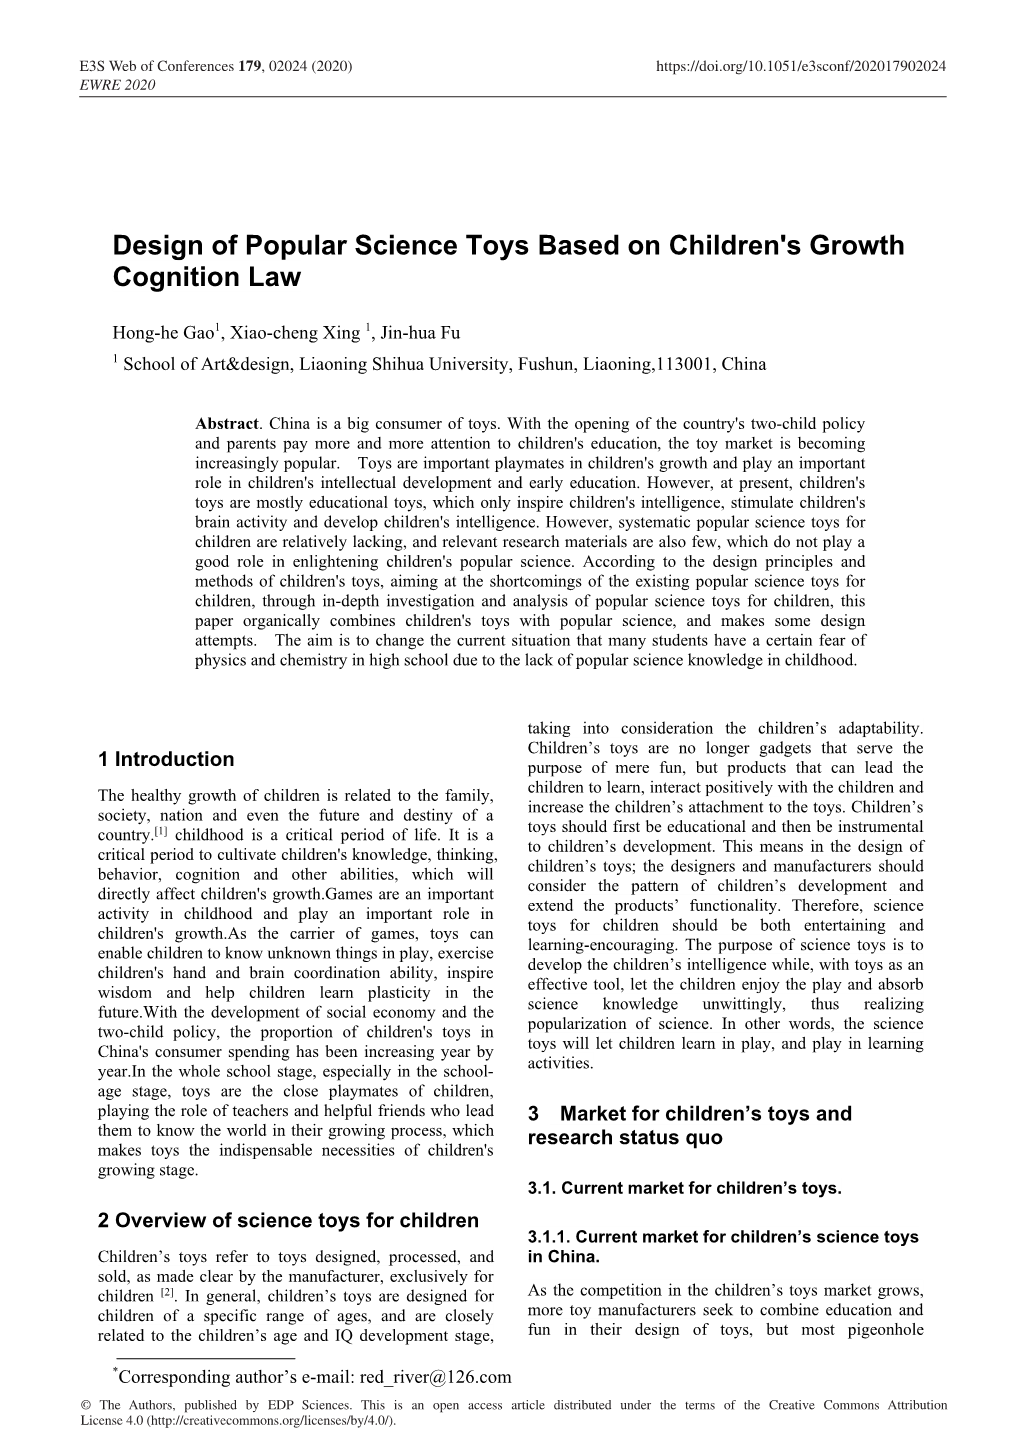 Design of Popular Science Toys Based on Children's Growth Cognition Law